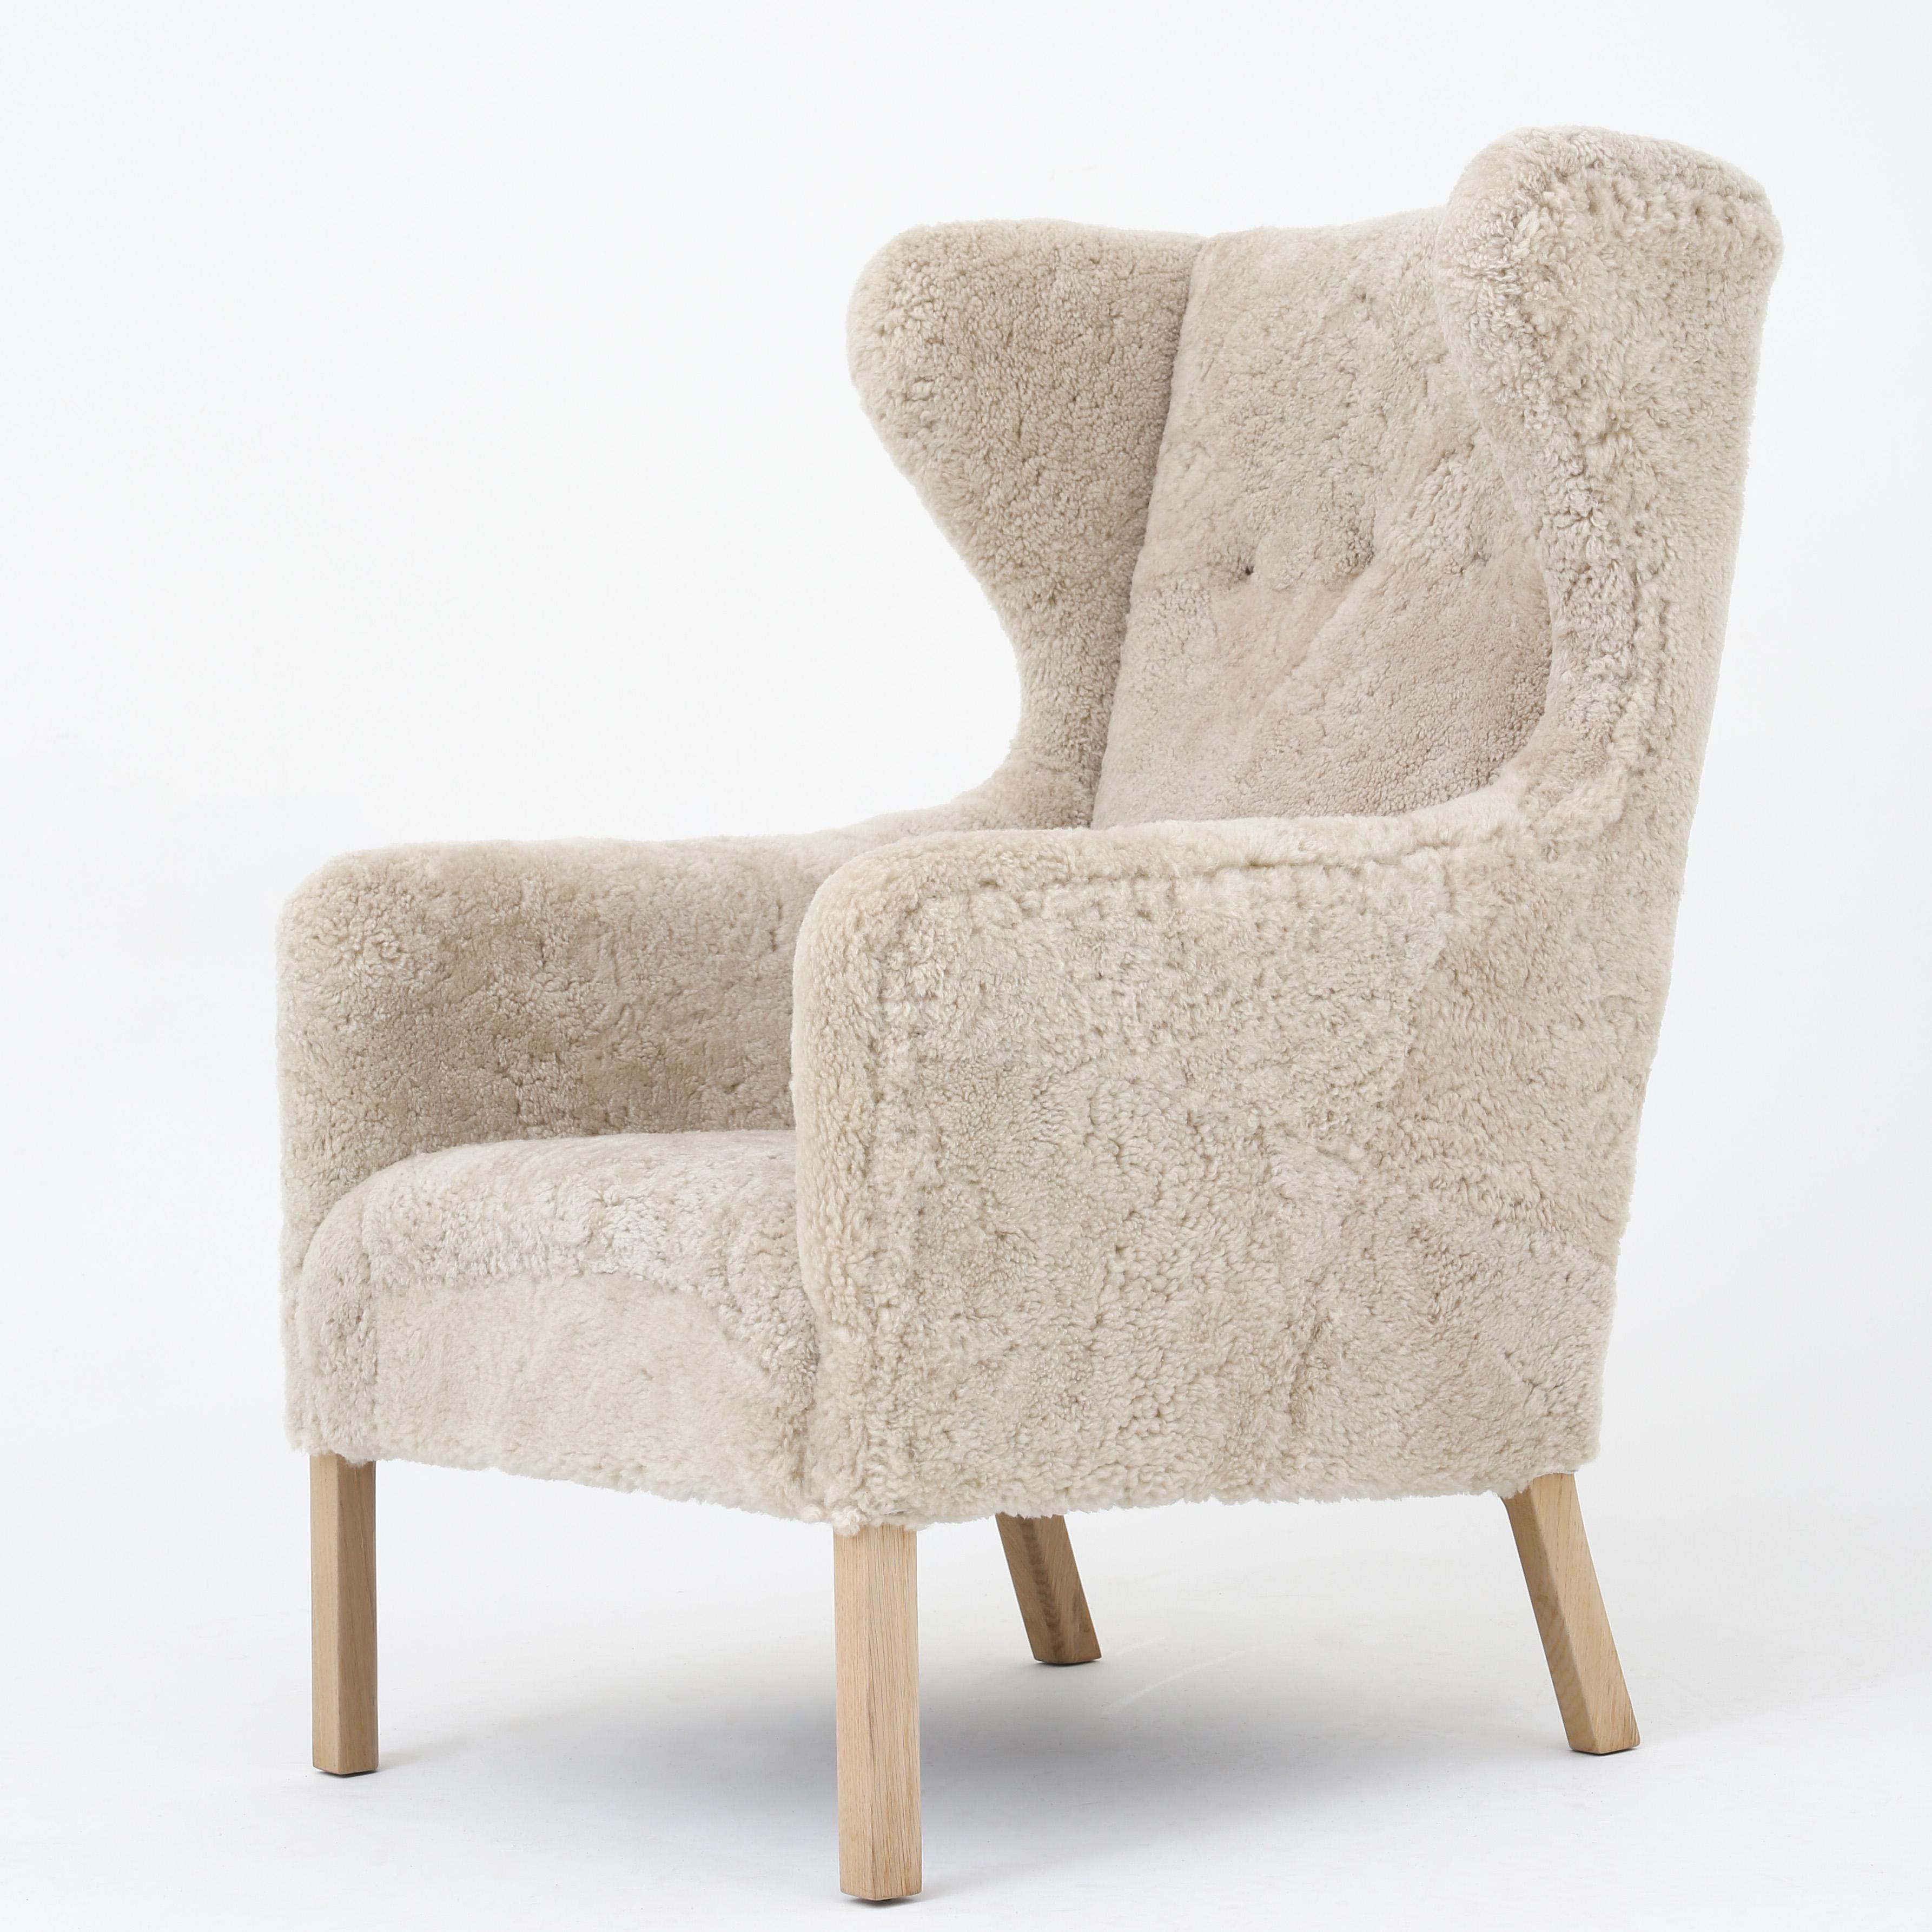 Scandinavian Modern Ejnar Larsen Wing-Back Chair in New Lambswool with Beech Legs with Stool